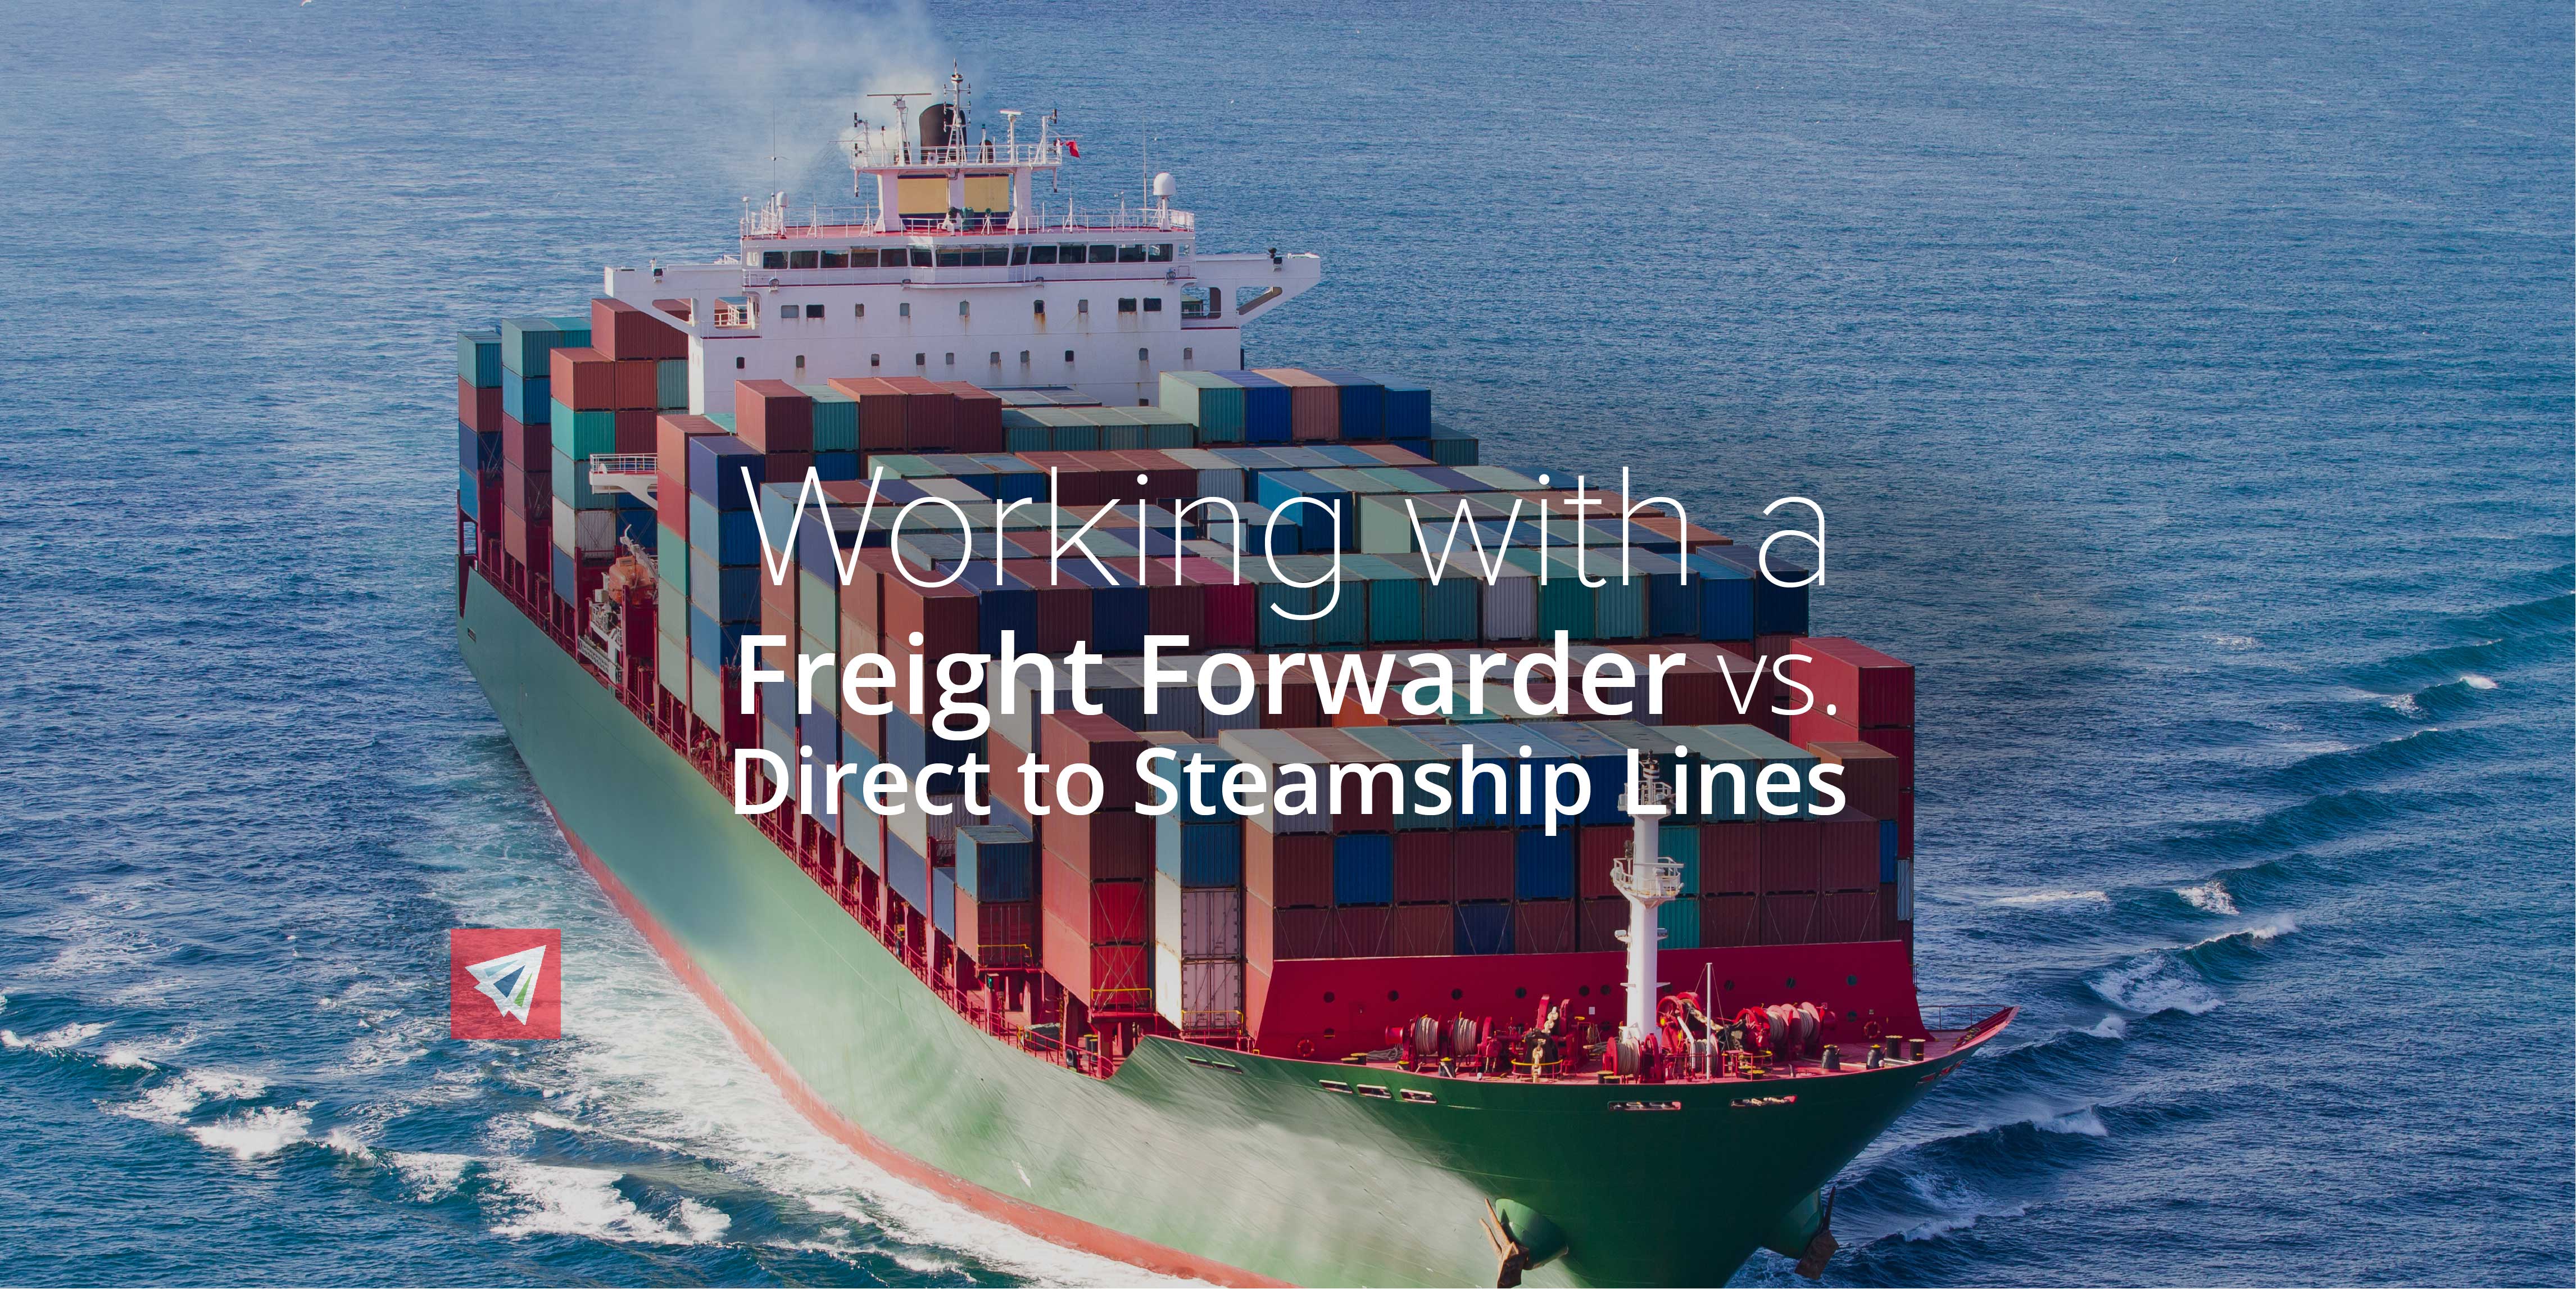 Working with a Freight Forwarder vs. Going Directly to Steamship Lines